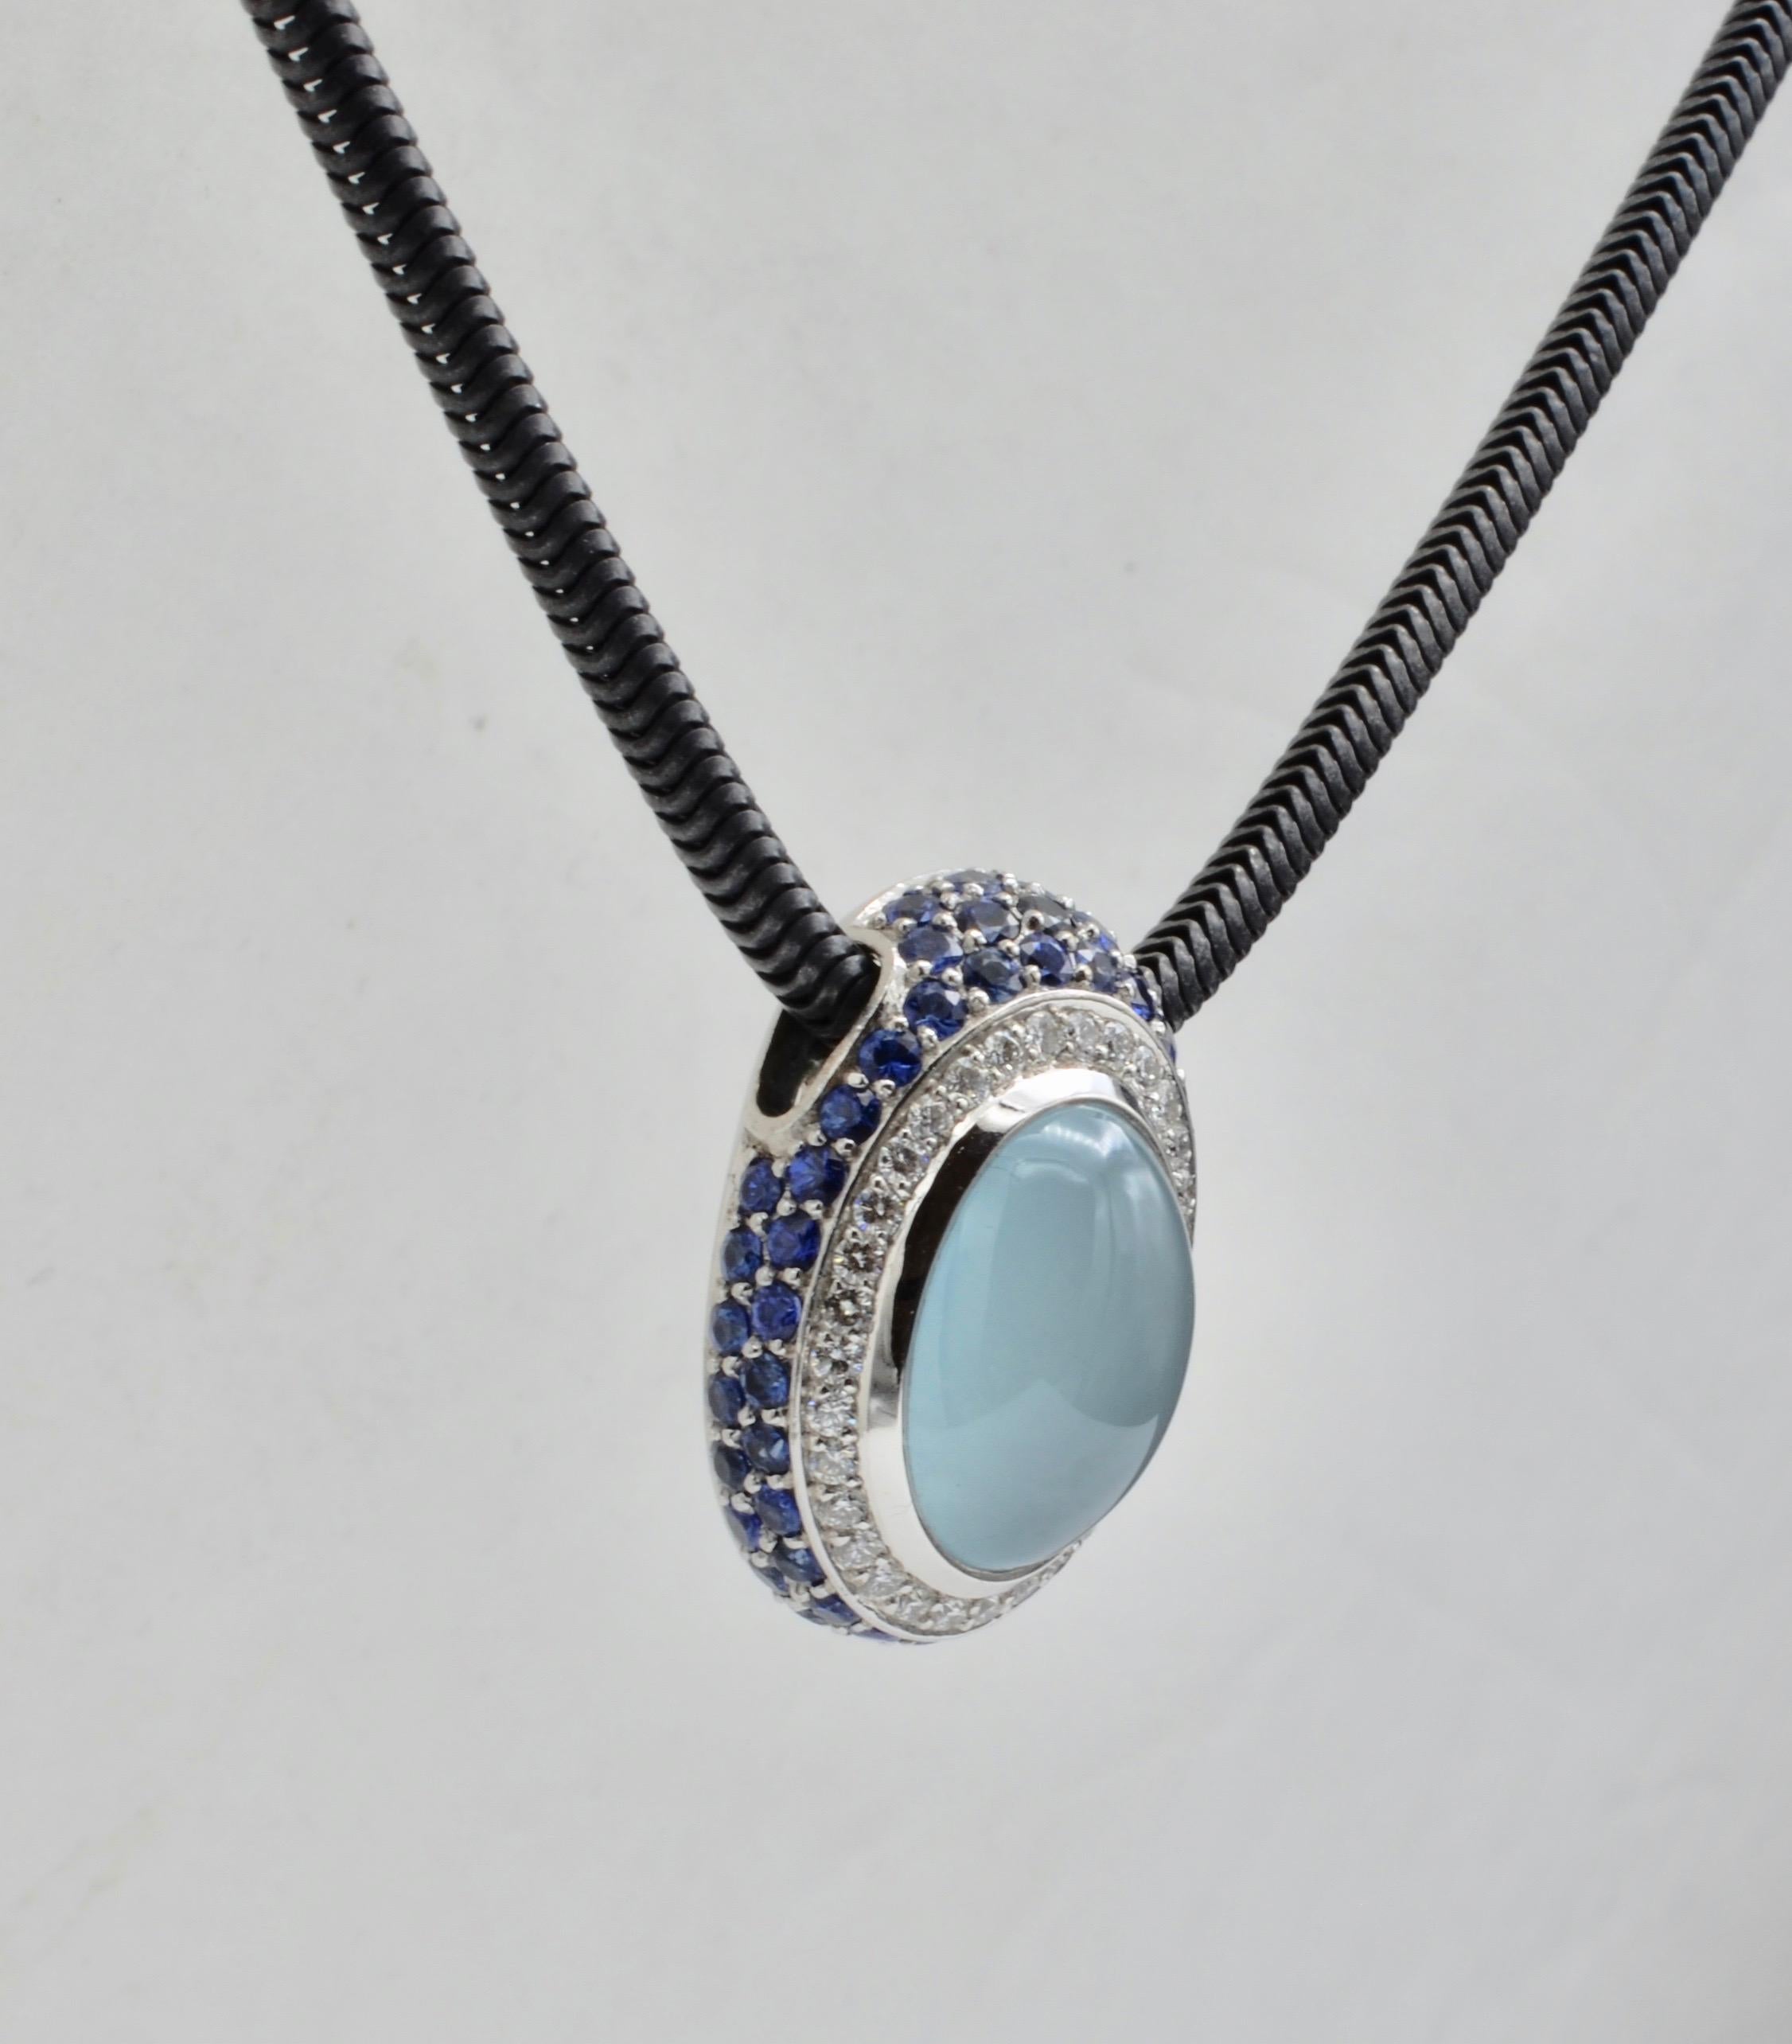 This yummy milky aquamarine is beautifully framed in a blaze of sapphire and diamonds The aquamarine is 8.52 ct. The sapphire total weight is 2.81 ct and the diamond weight is 0.32 ct.. The chain is oxidized silver and perfectly lends itself to the